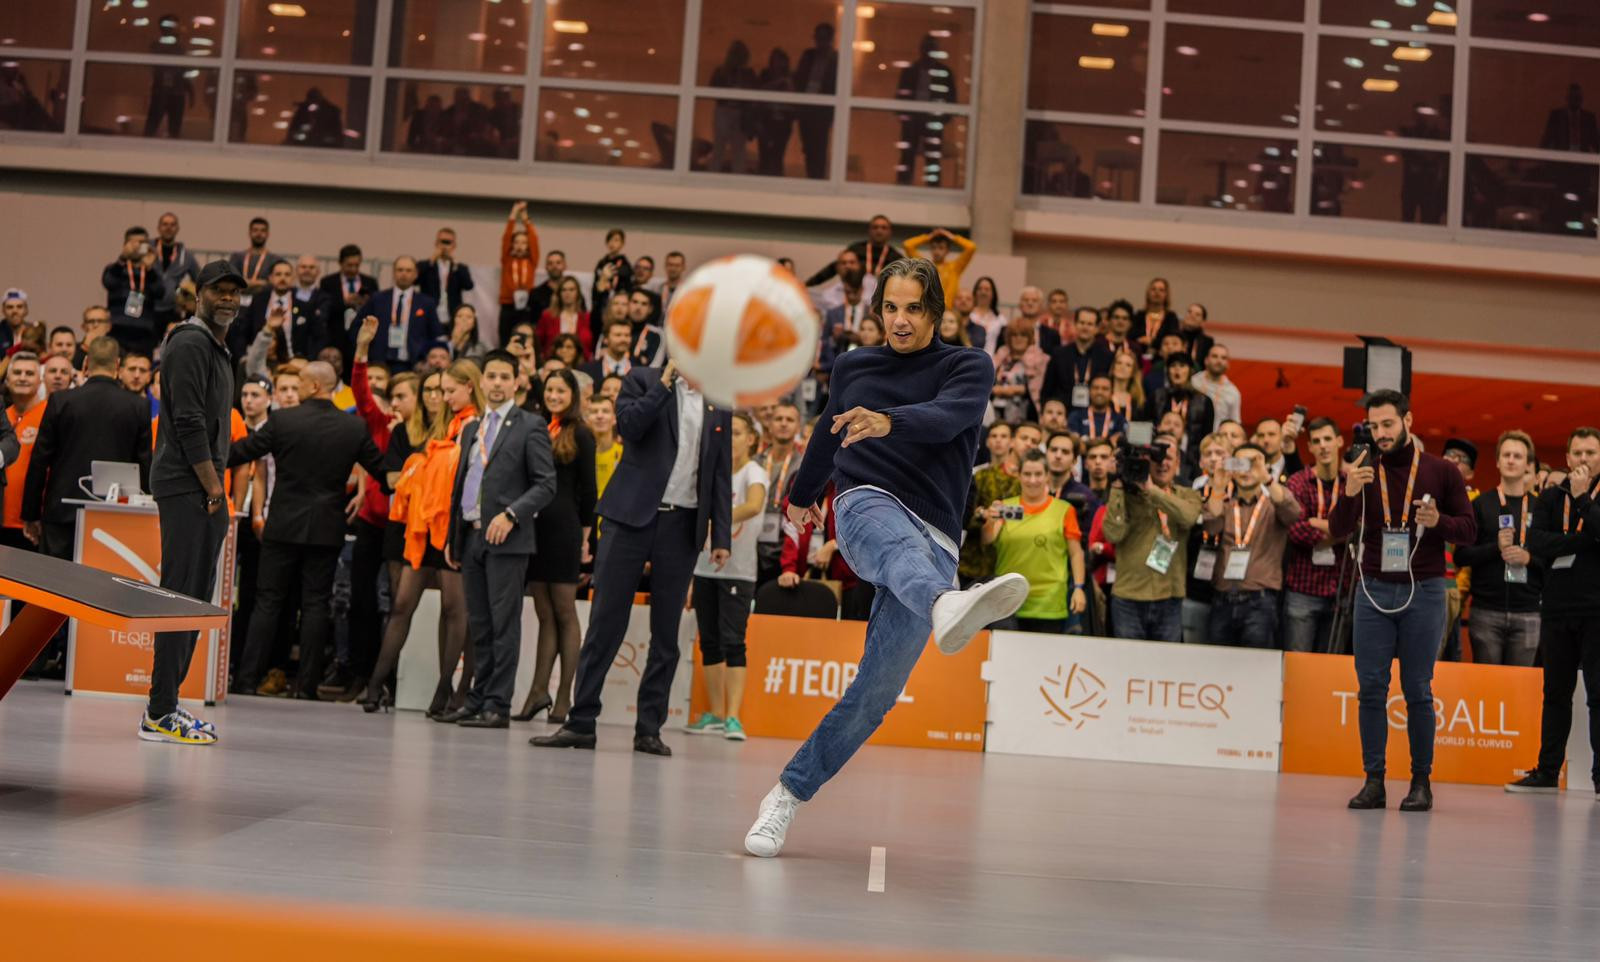 Footballing legends out in force on second day of Teqball World Championships